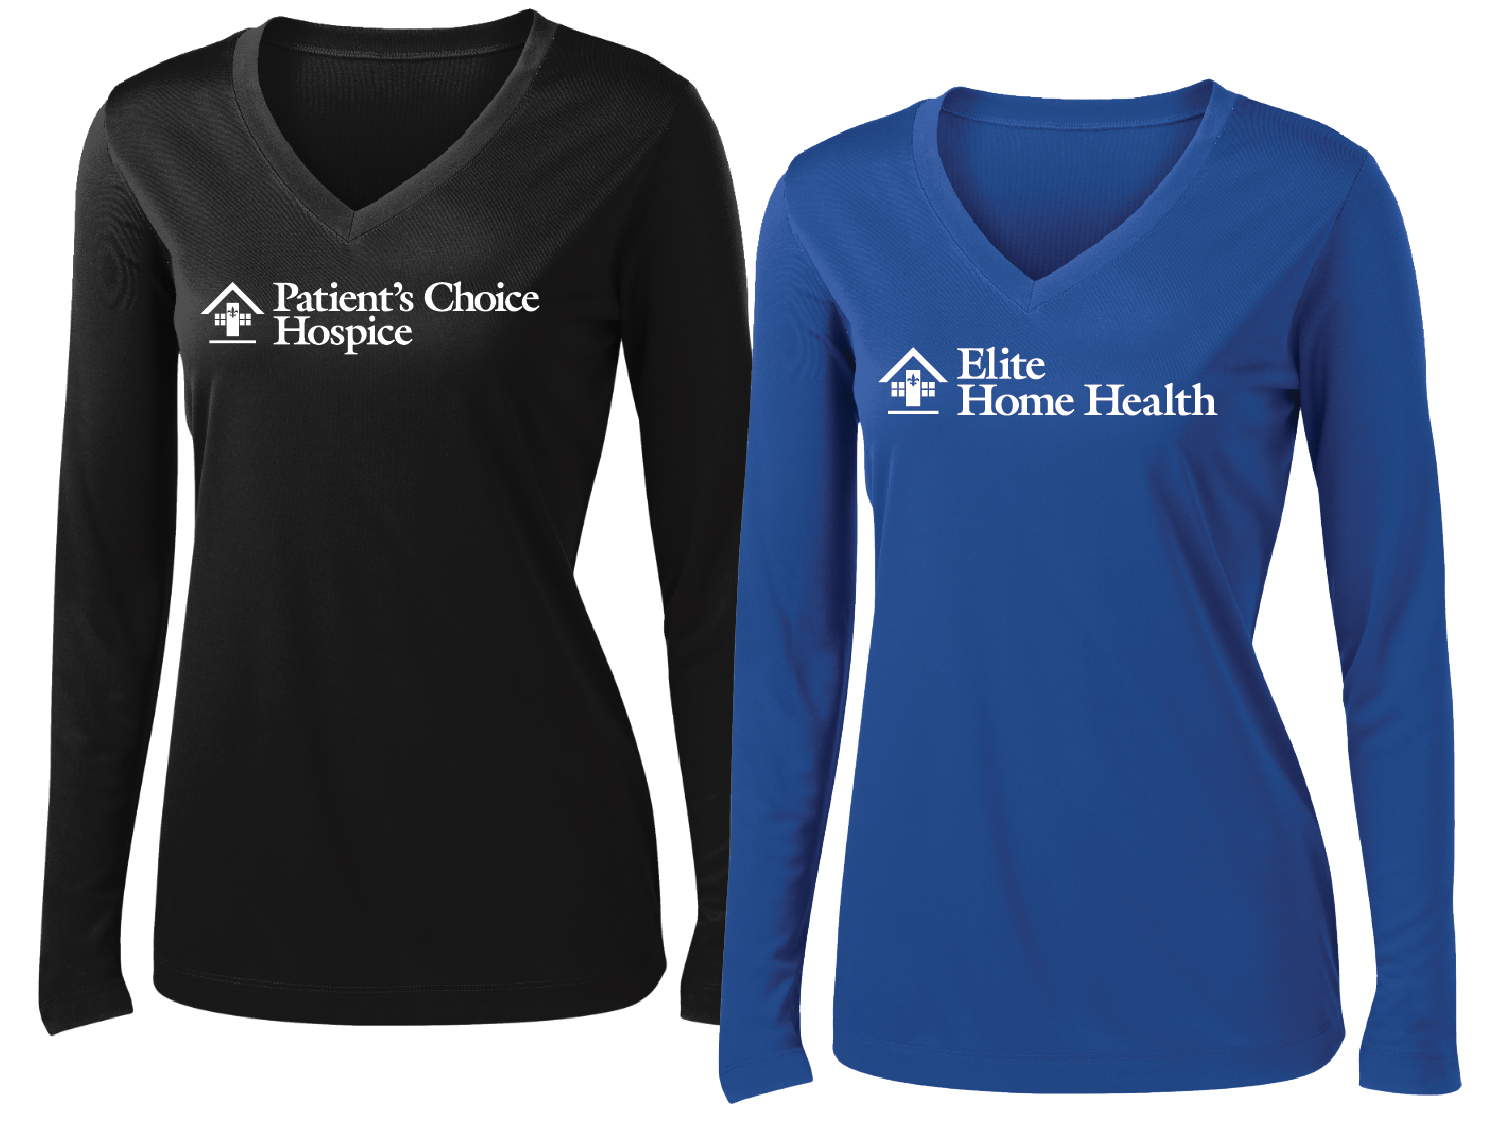 *DRY FIT* LHC Long Sleeve Ladies Branch Tee (One color logo)  